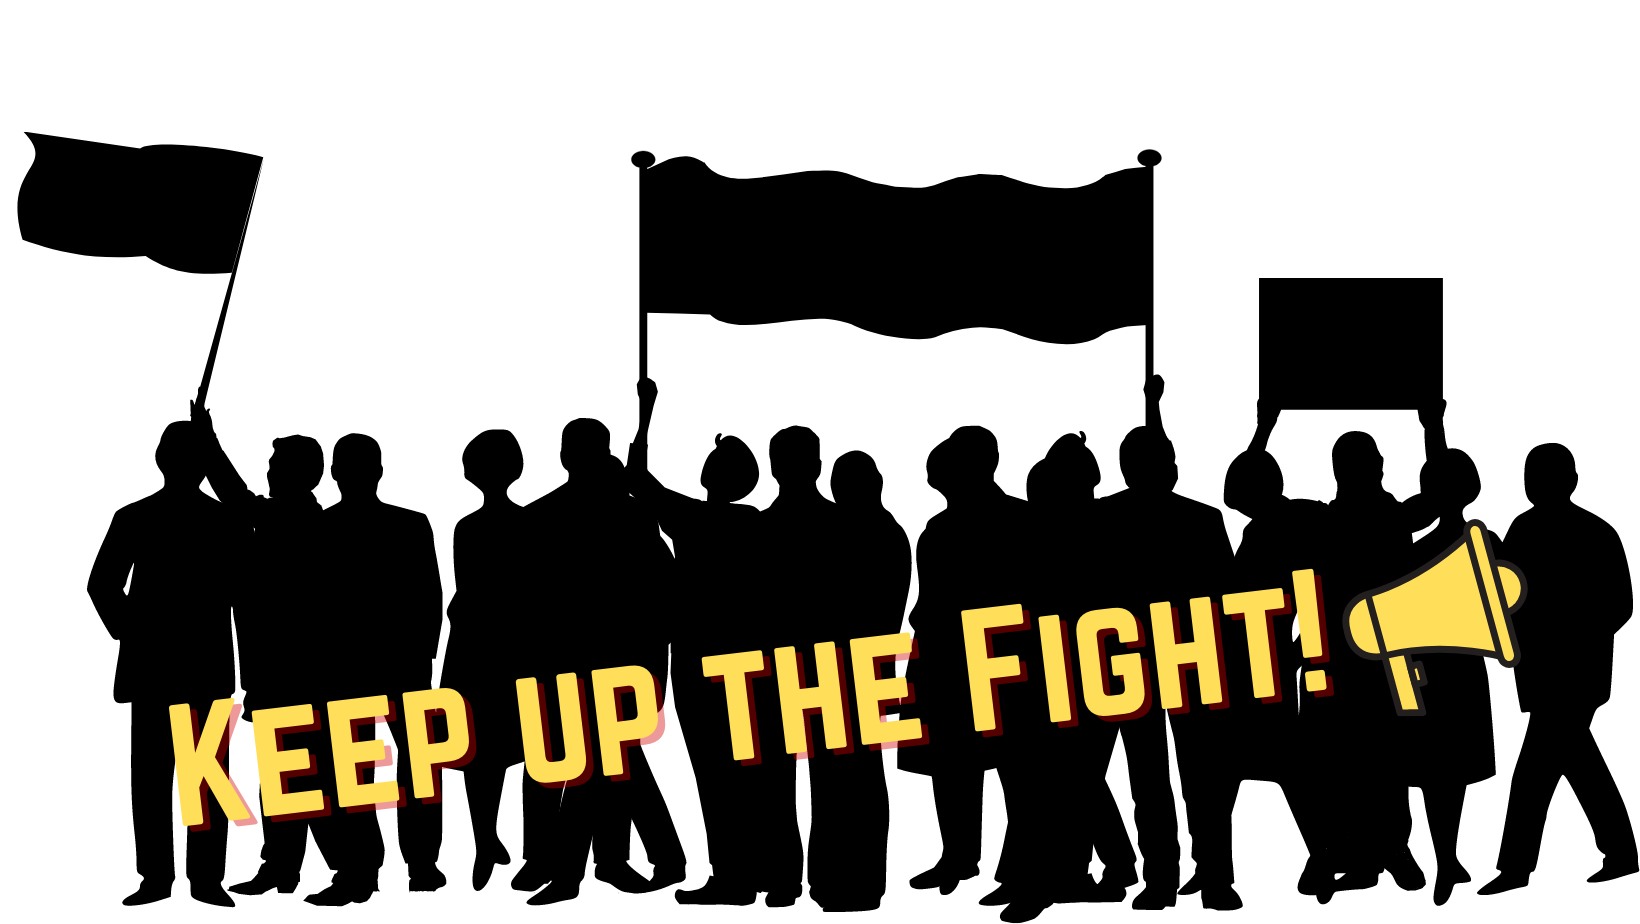 A graphic of people protesting and the words "Keep up the Fight!"